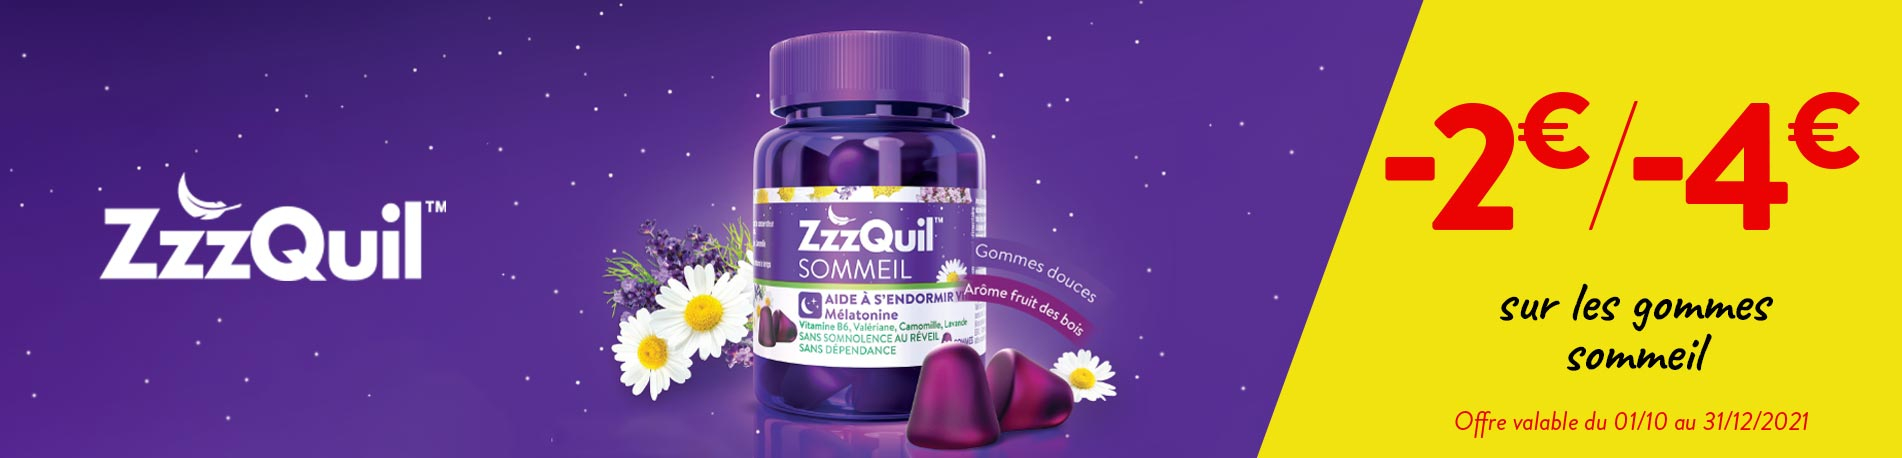 Promotion ZzzQuil